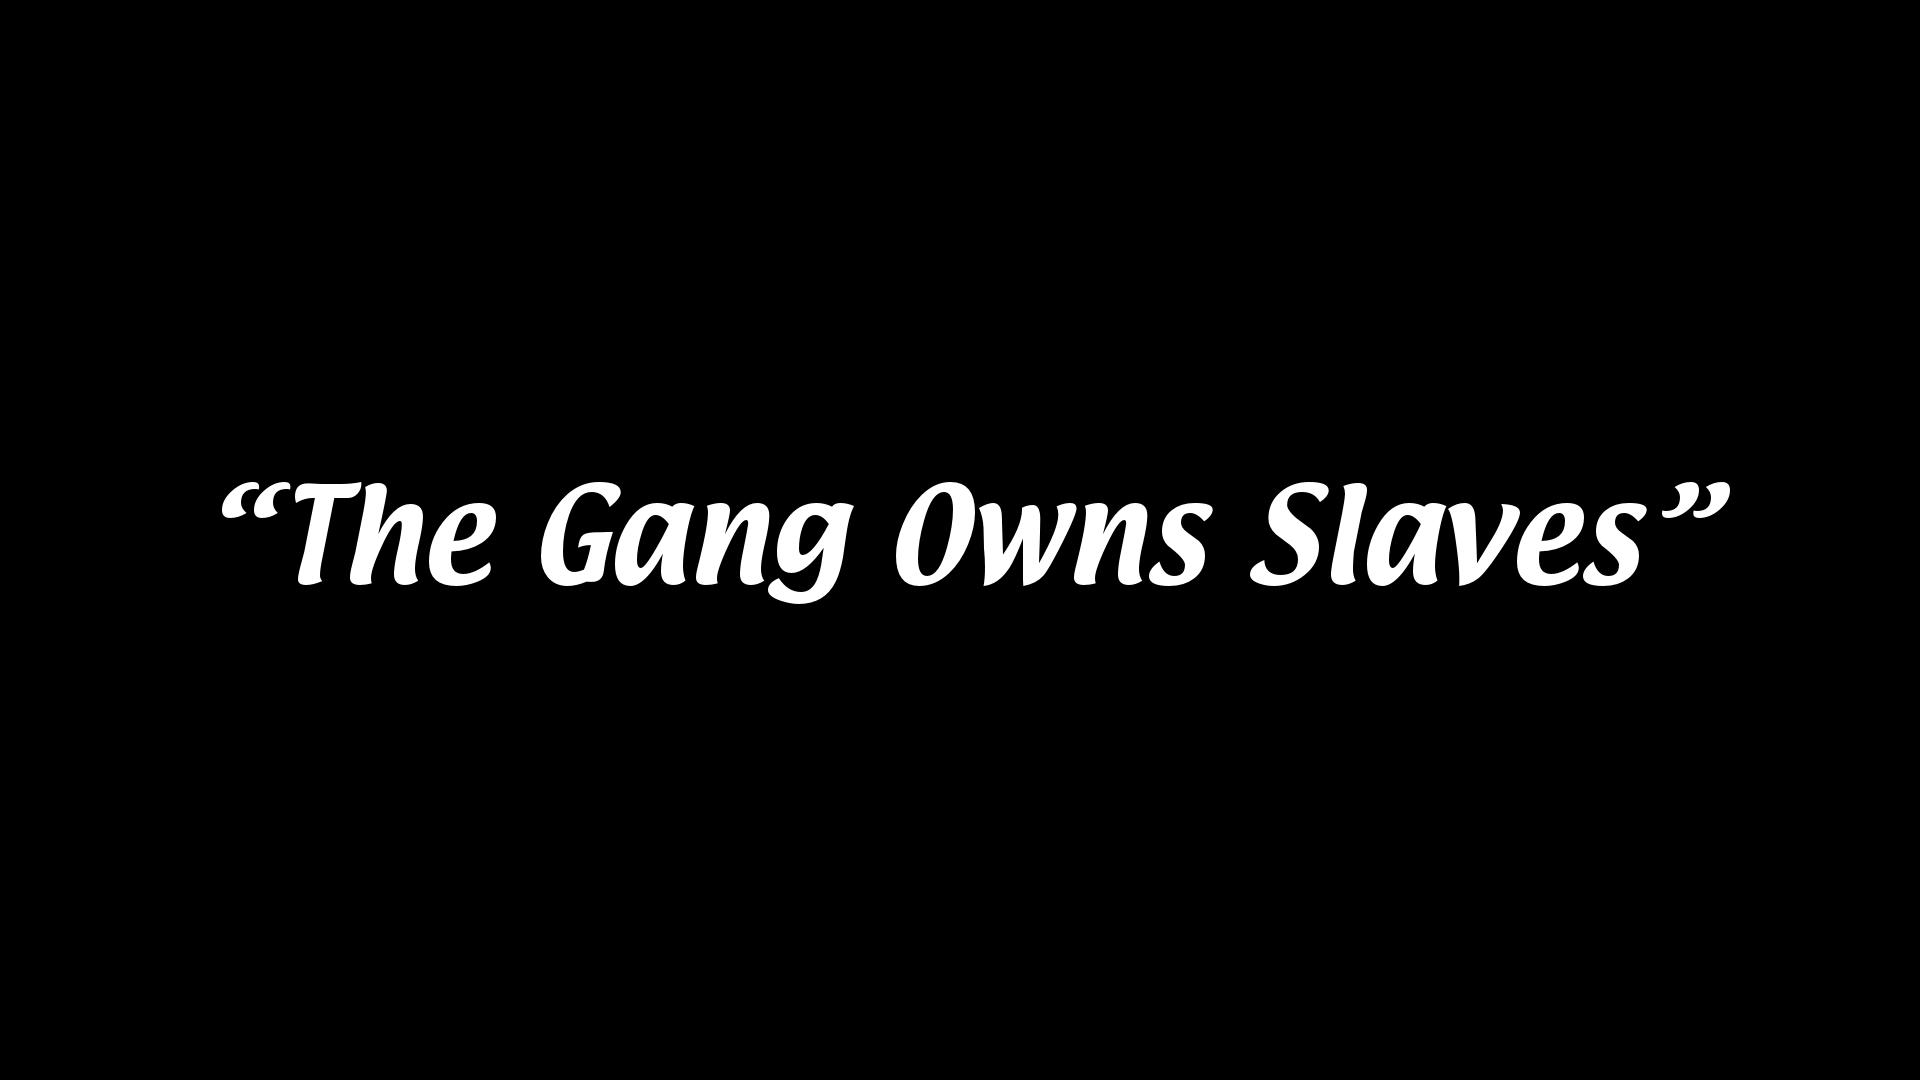 It's Always Sunny In Philadelphia title card that reads, “The Gang Owns Slaves”